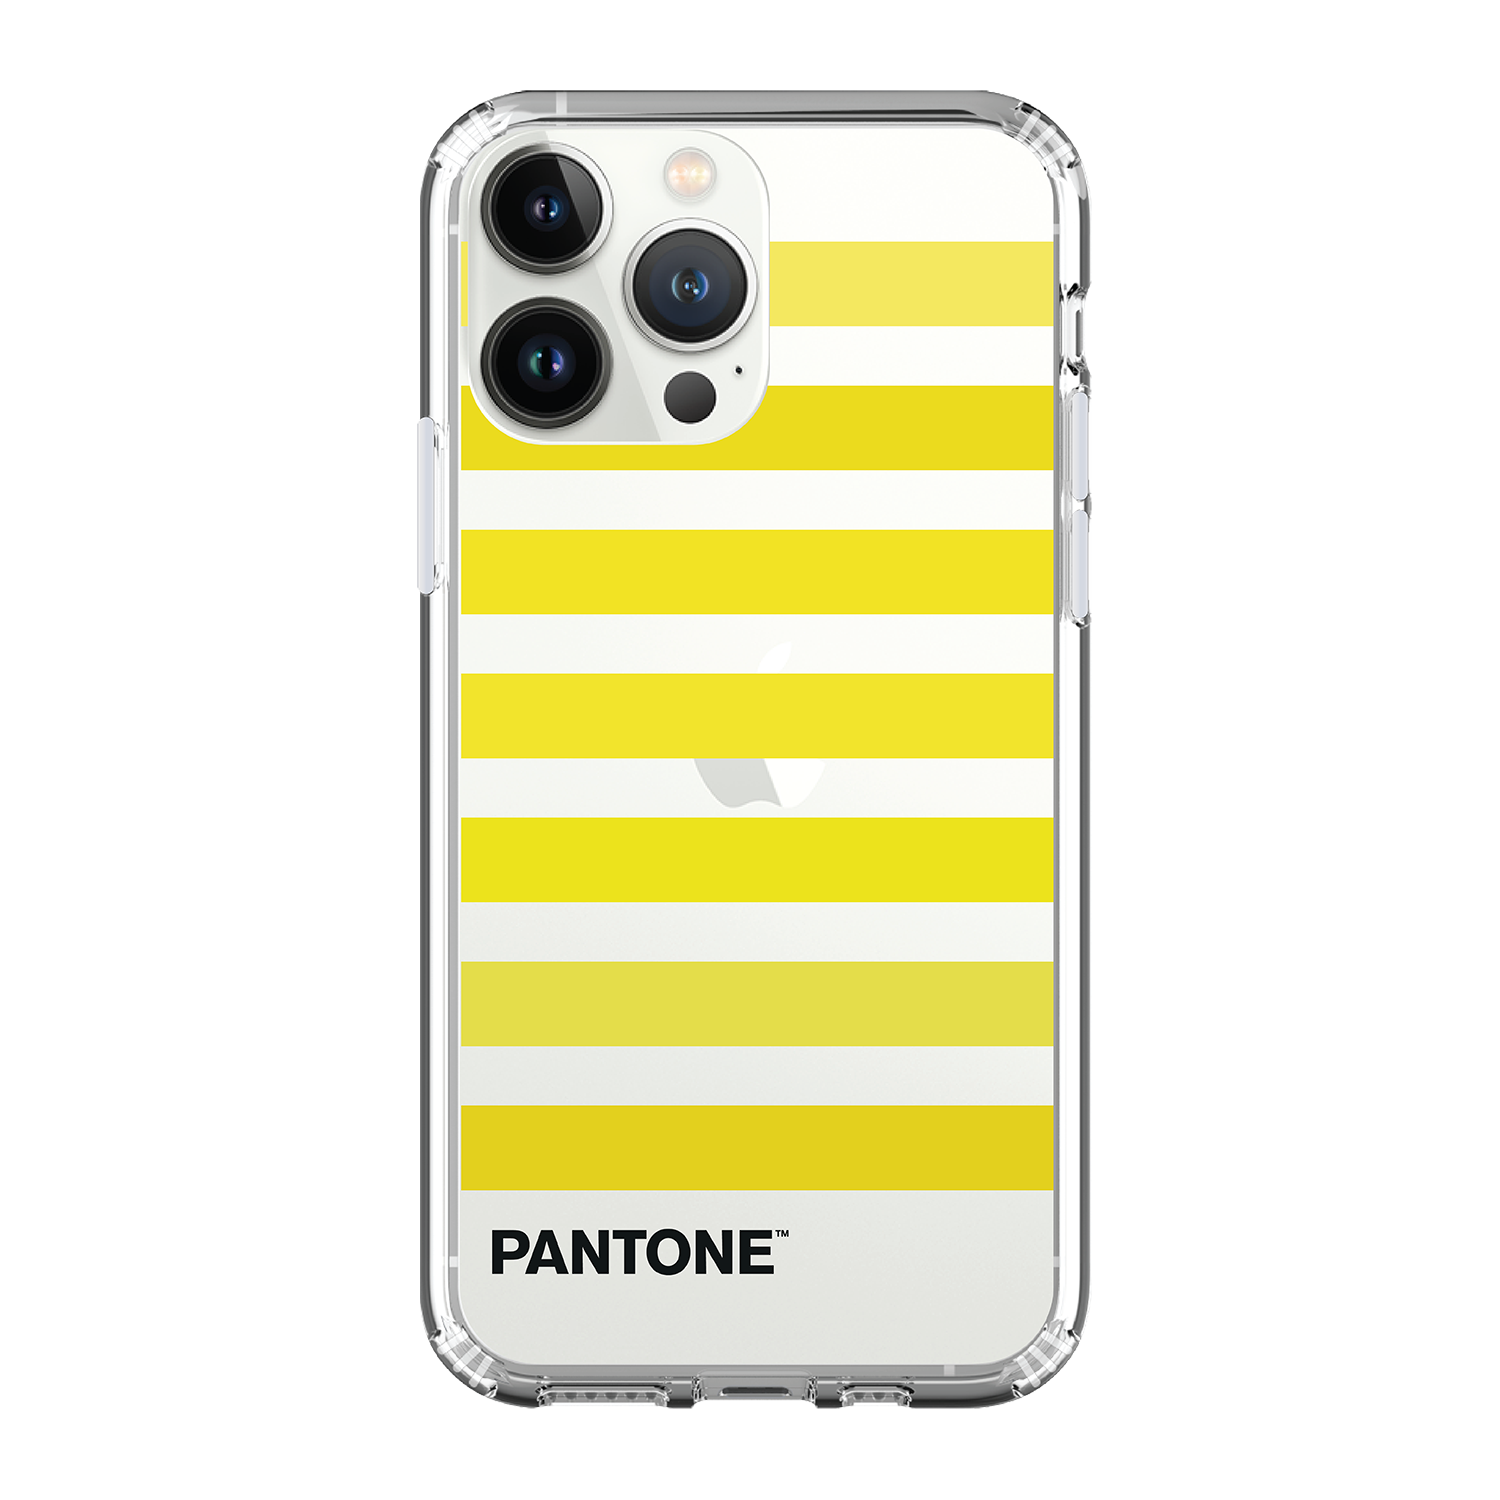 PANTONE Clear Case / iPhone Case / Android Case / Samsung Case 正版授權 全包邊氣囊防撞手機殼 (PE12)